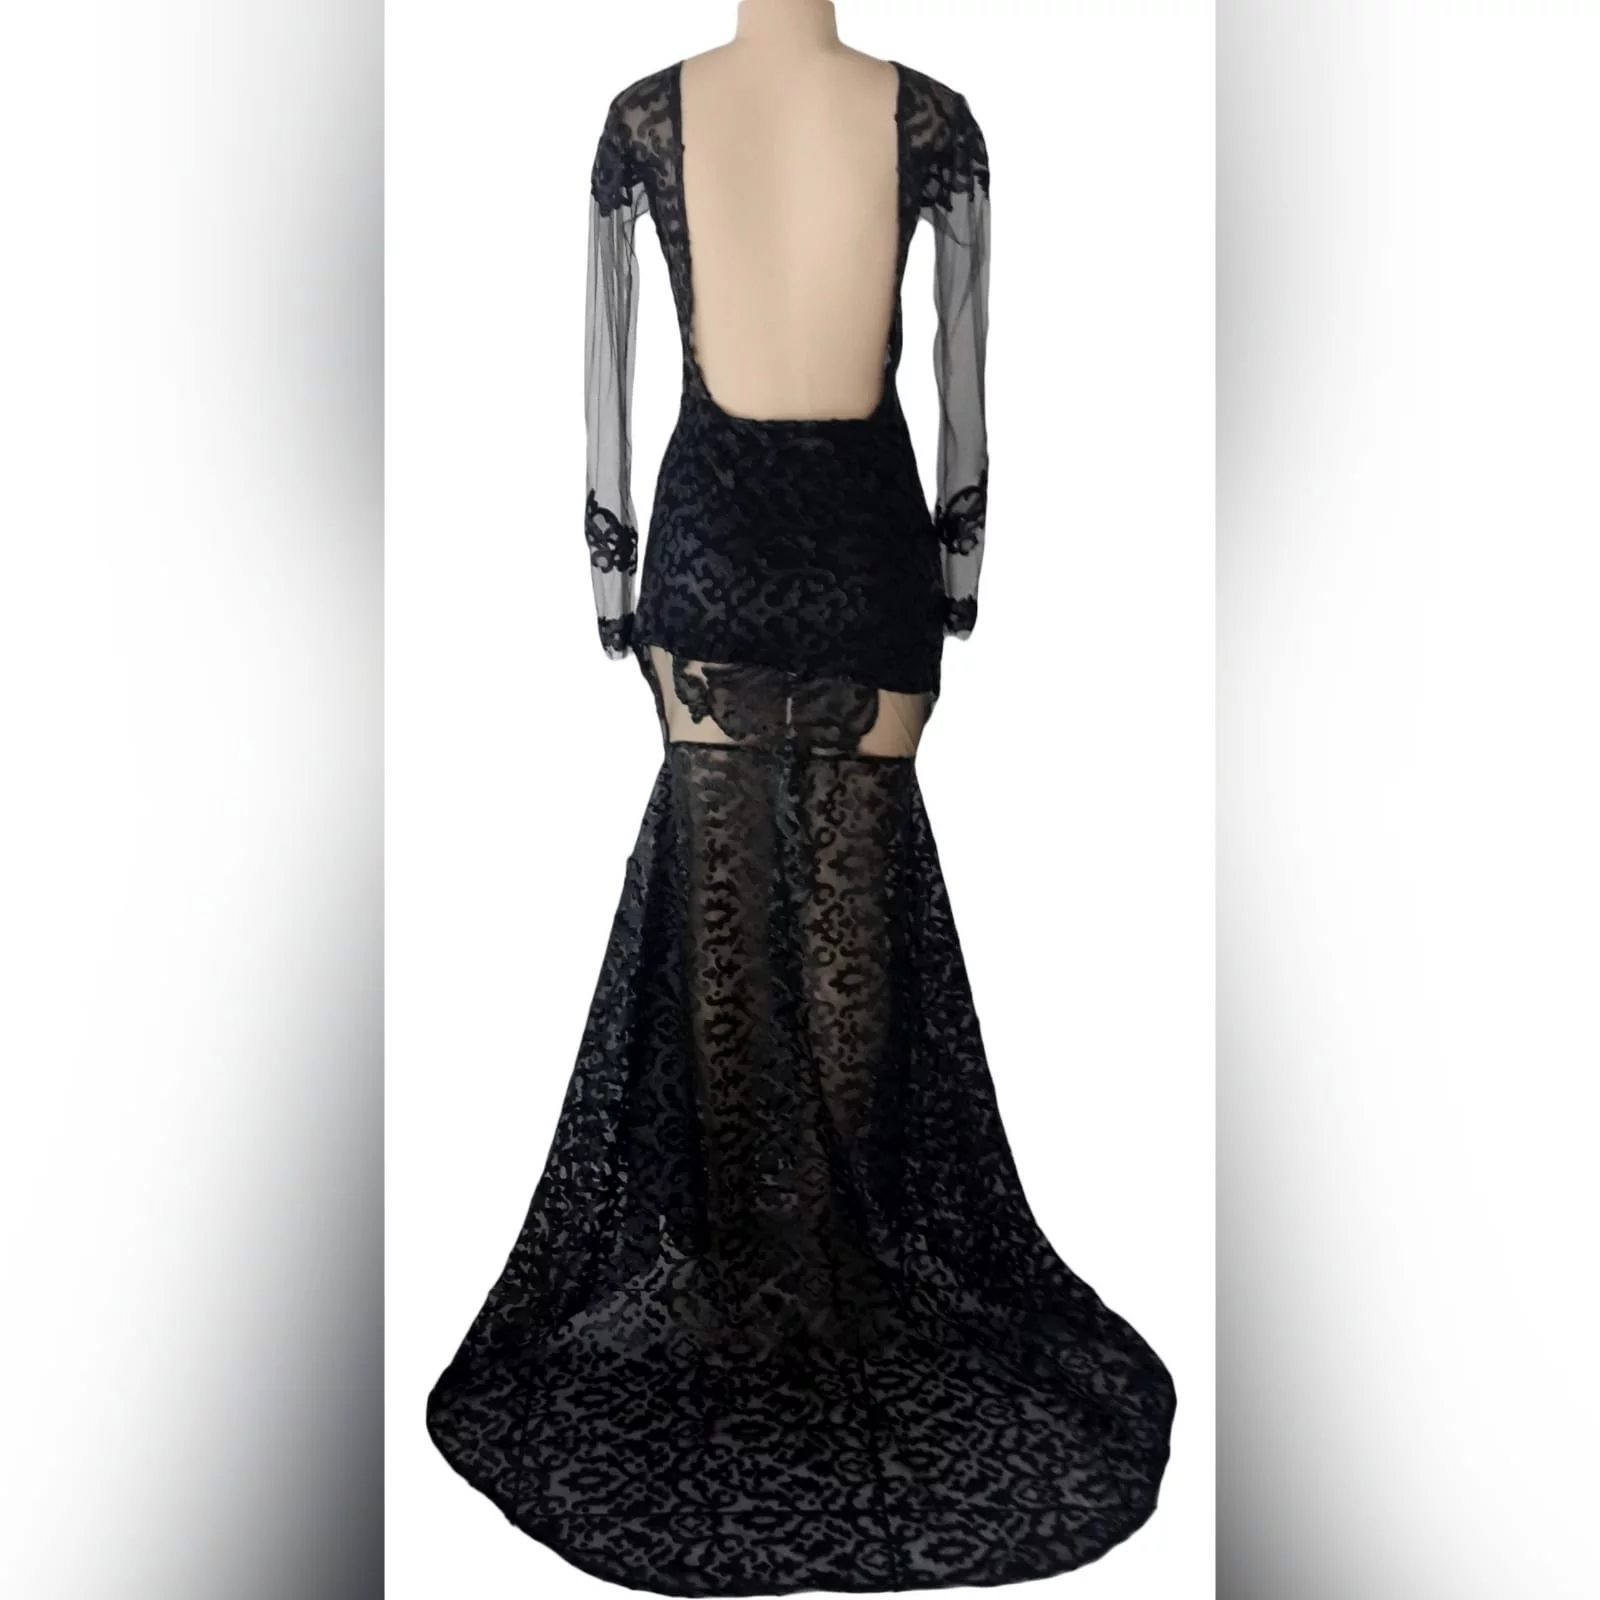 21st birthday party black dress 5 black long suede lace evening dress for 21st birthday party, with sheer black long sleeves and sheer thigh area, with a train and an open back